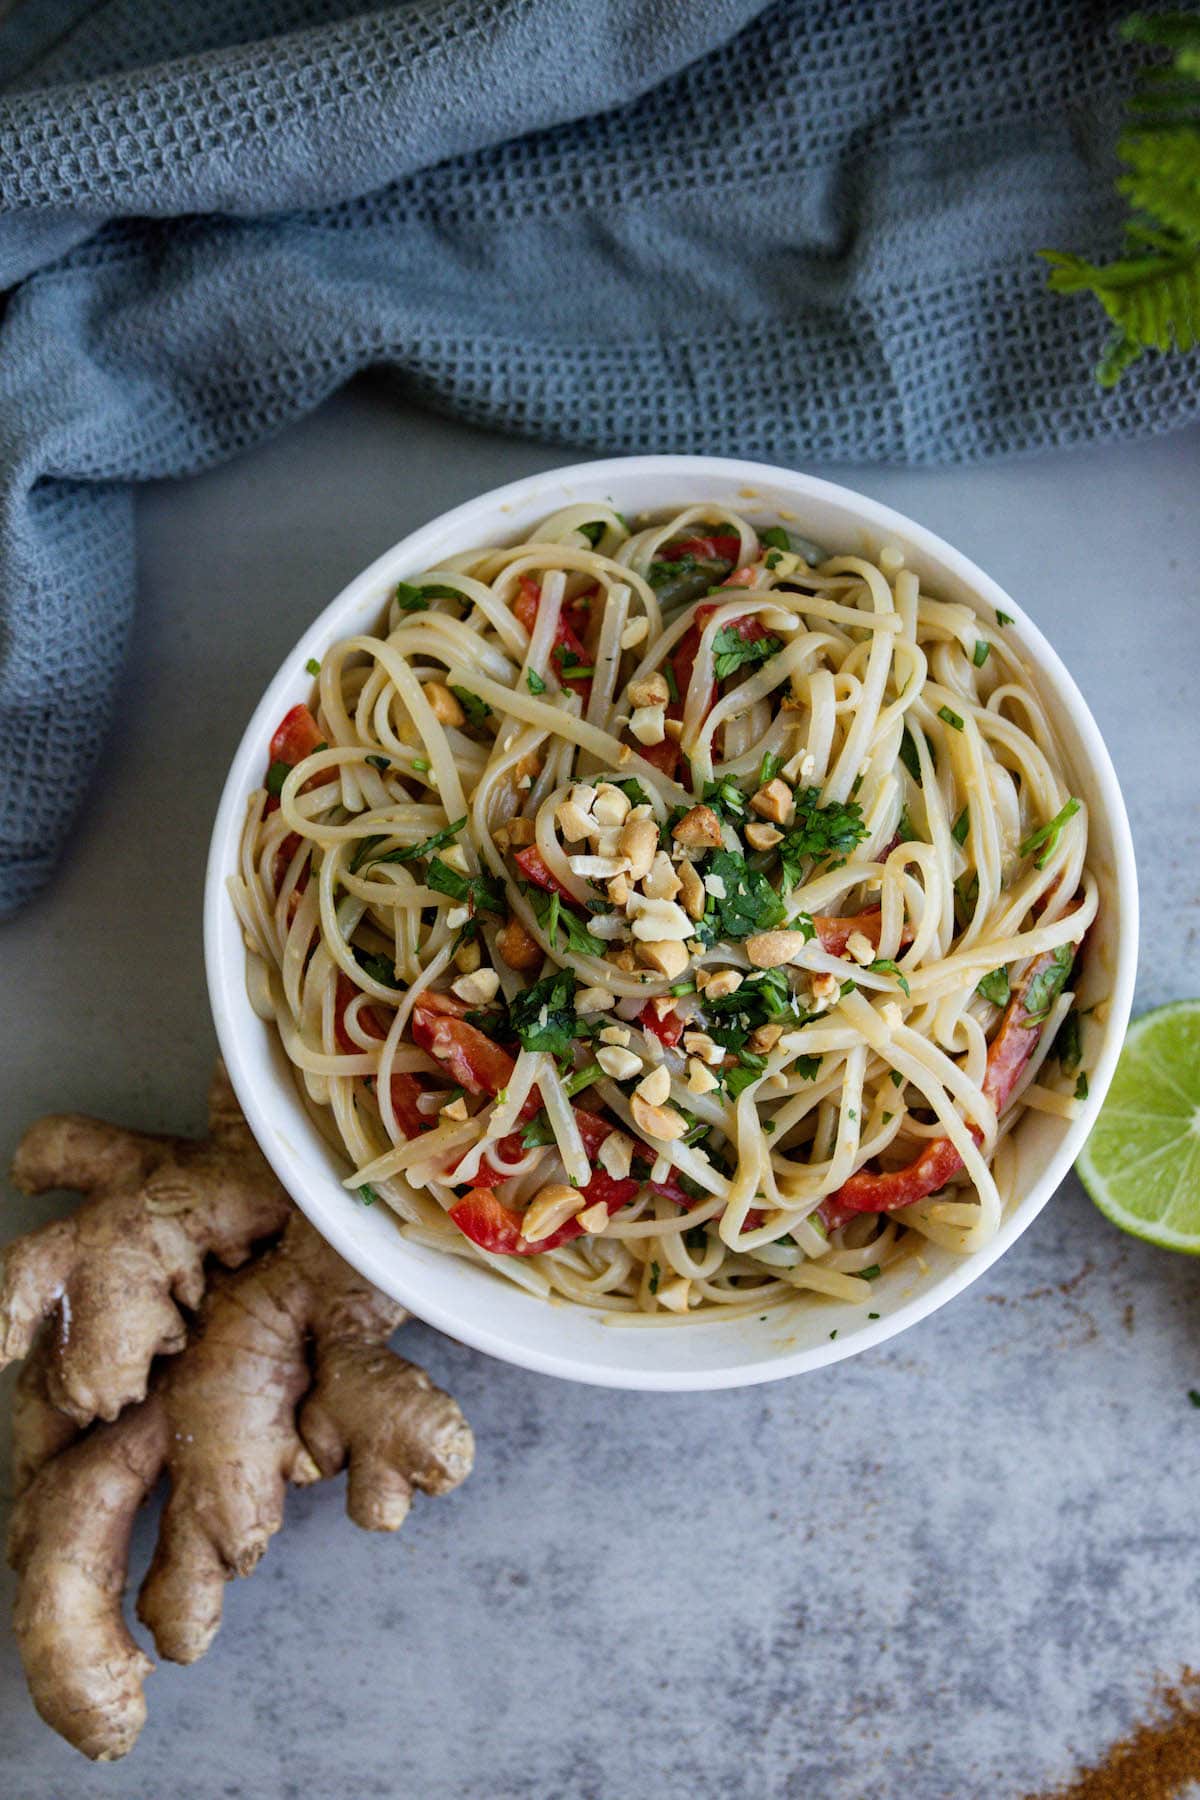 noodles, bell pepper, cilantro, and sauce, lime and ginger around them